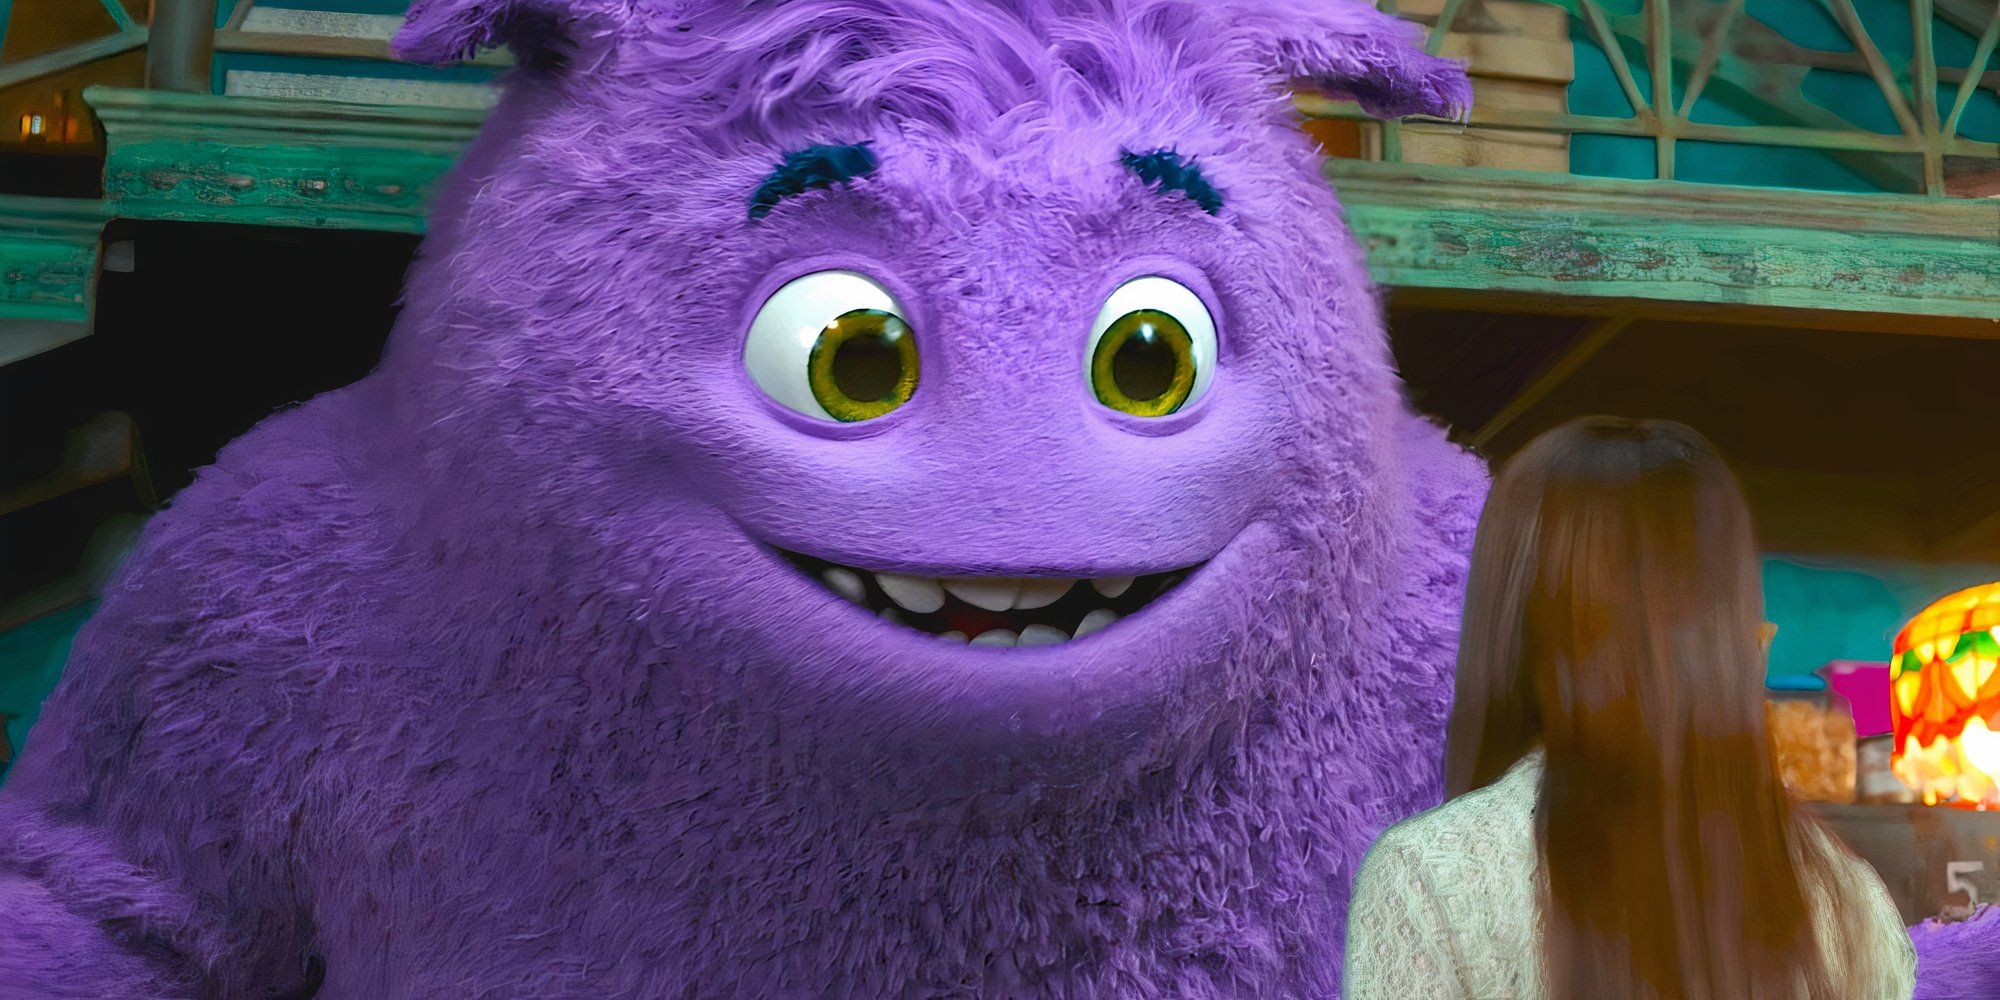 A large purple monster with big friendly eyes talks to a small girl with long hair in a scene from IF